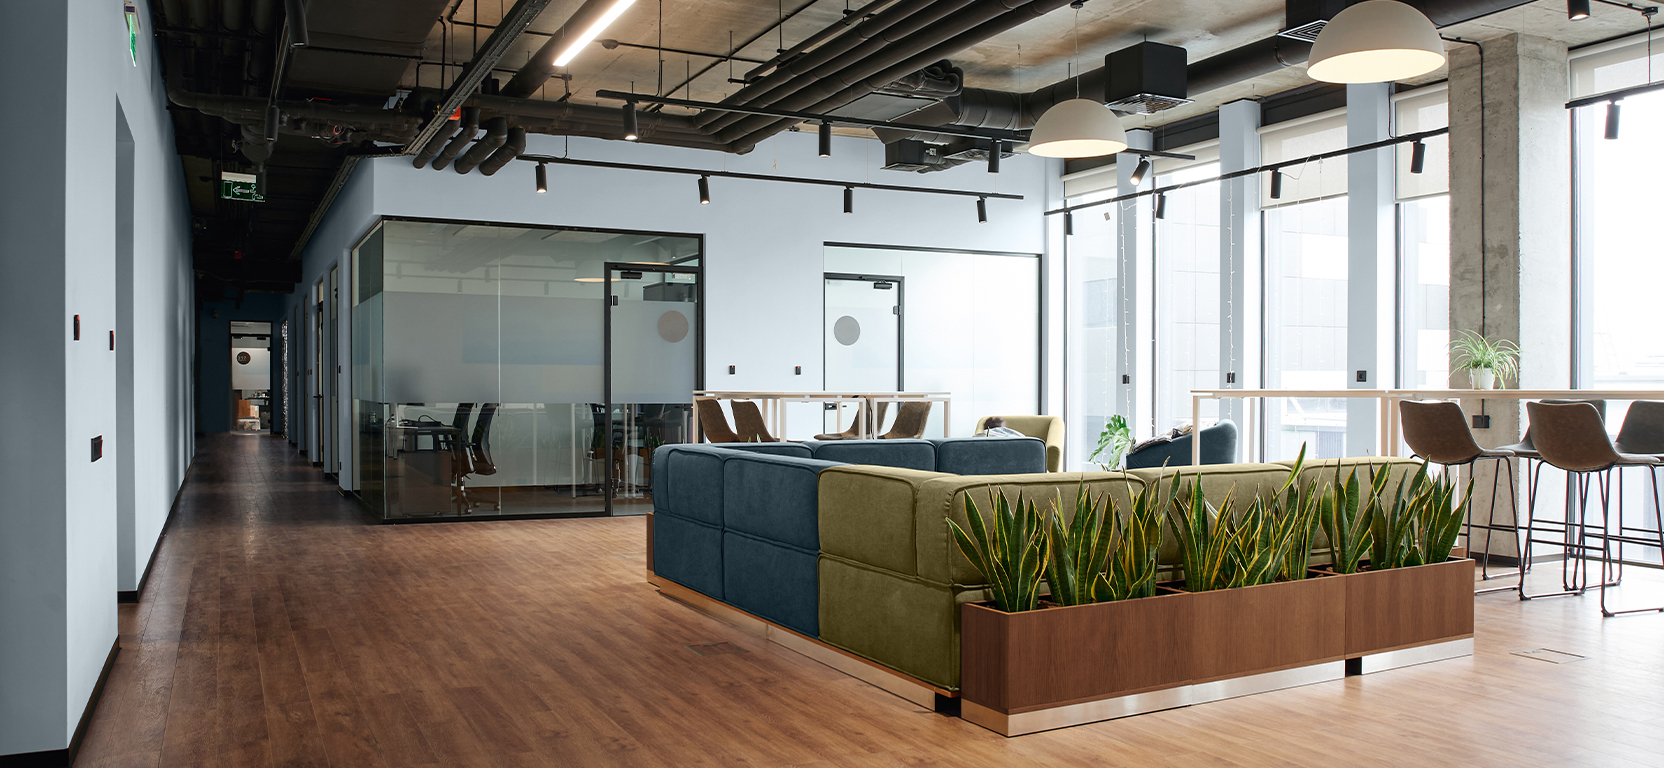 Open concept commercial interior with blue and green sectional seating in center, bar-height tables and chairs surrounding, greenery, high ceilings, industrial styling and wood floors complementing Upward walls.